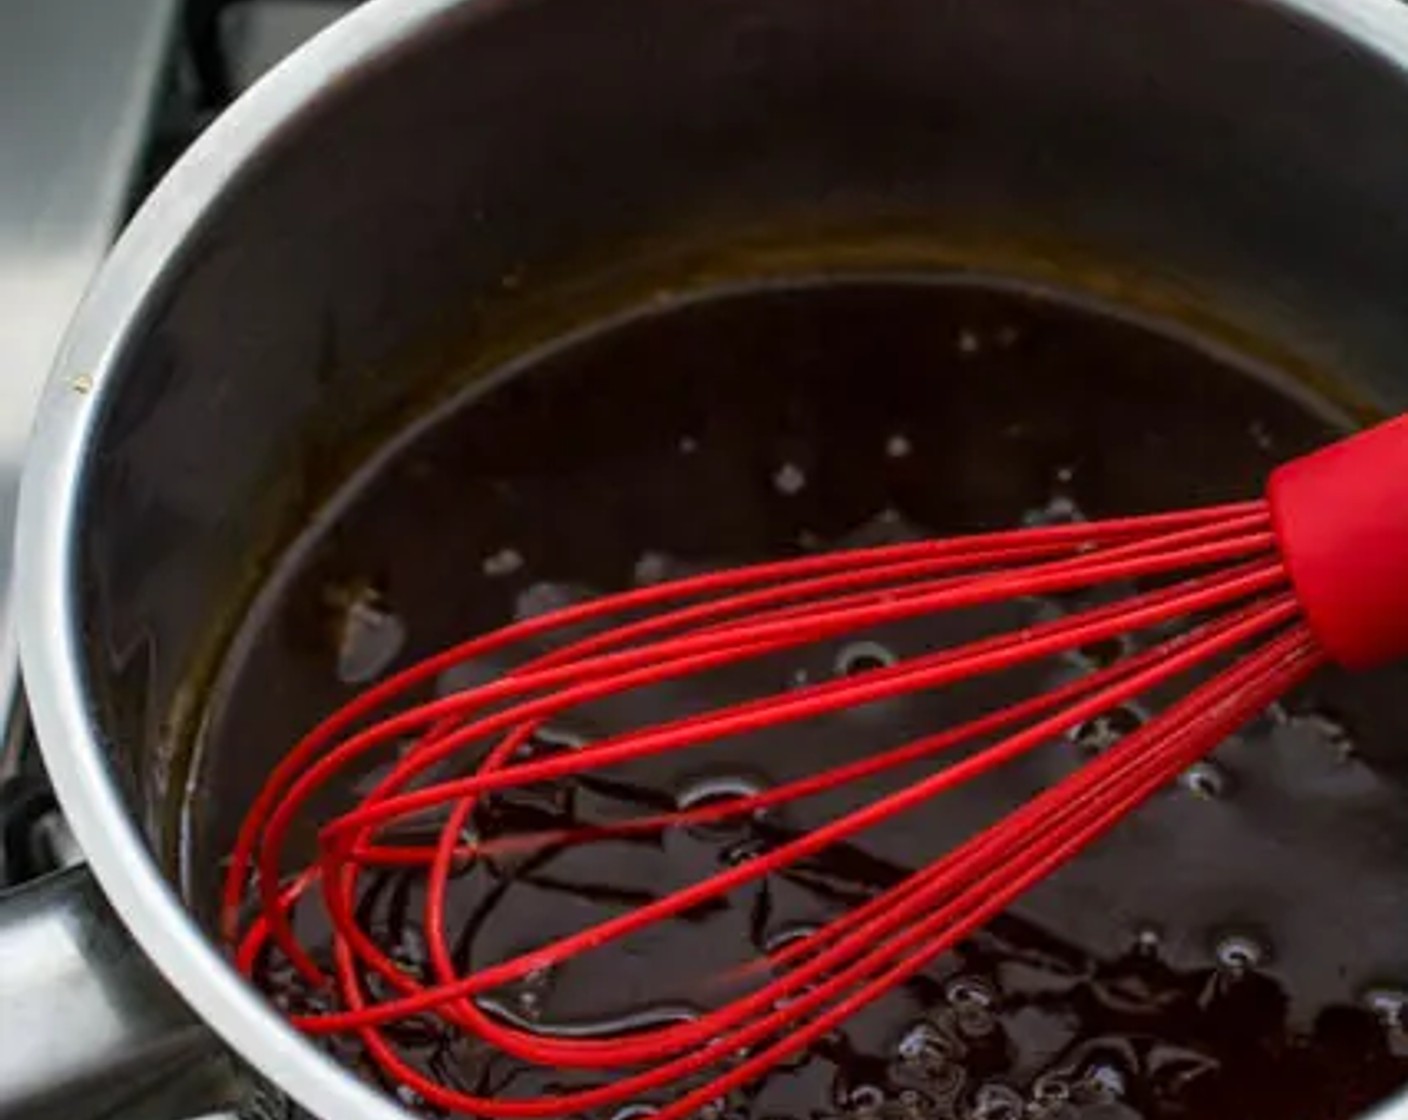 step 2 Bring the sauce ingredients to a boil in a saucepan over medium-high heat. Stir or whisk the sauce until it thickens.